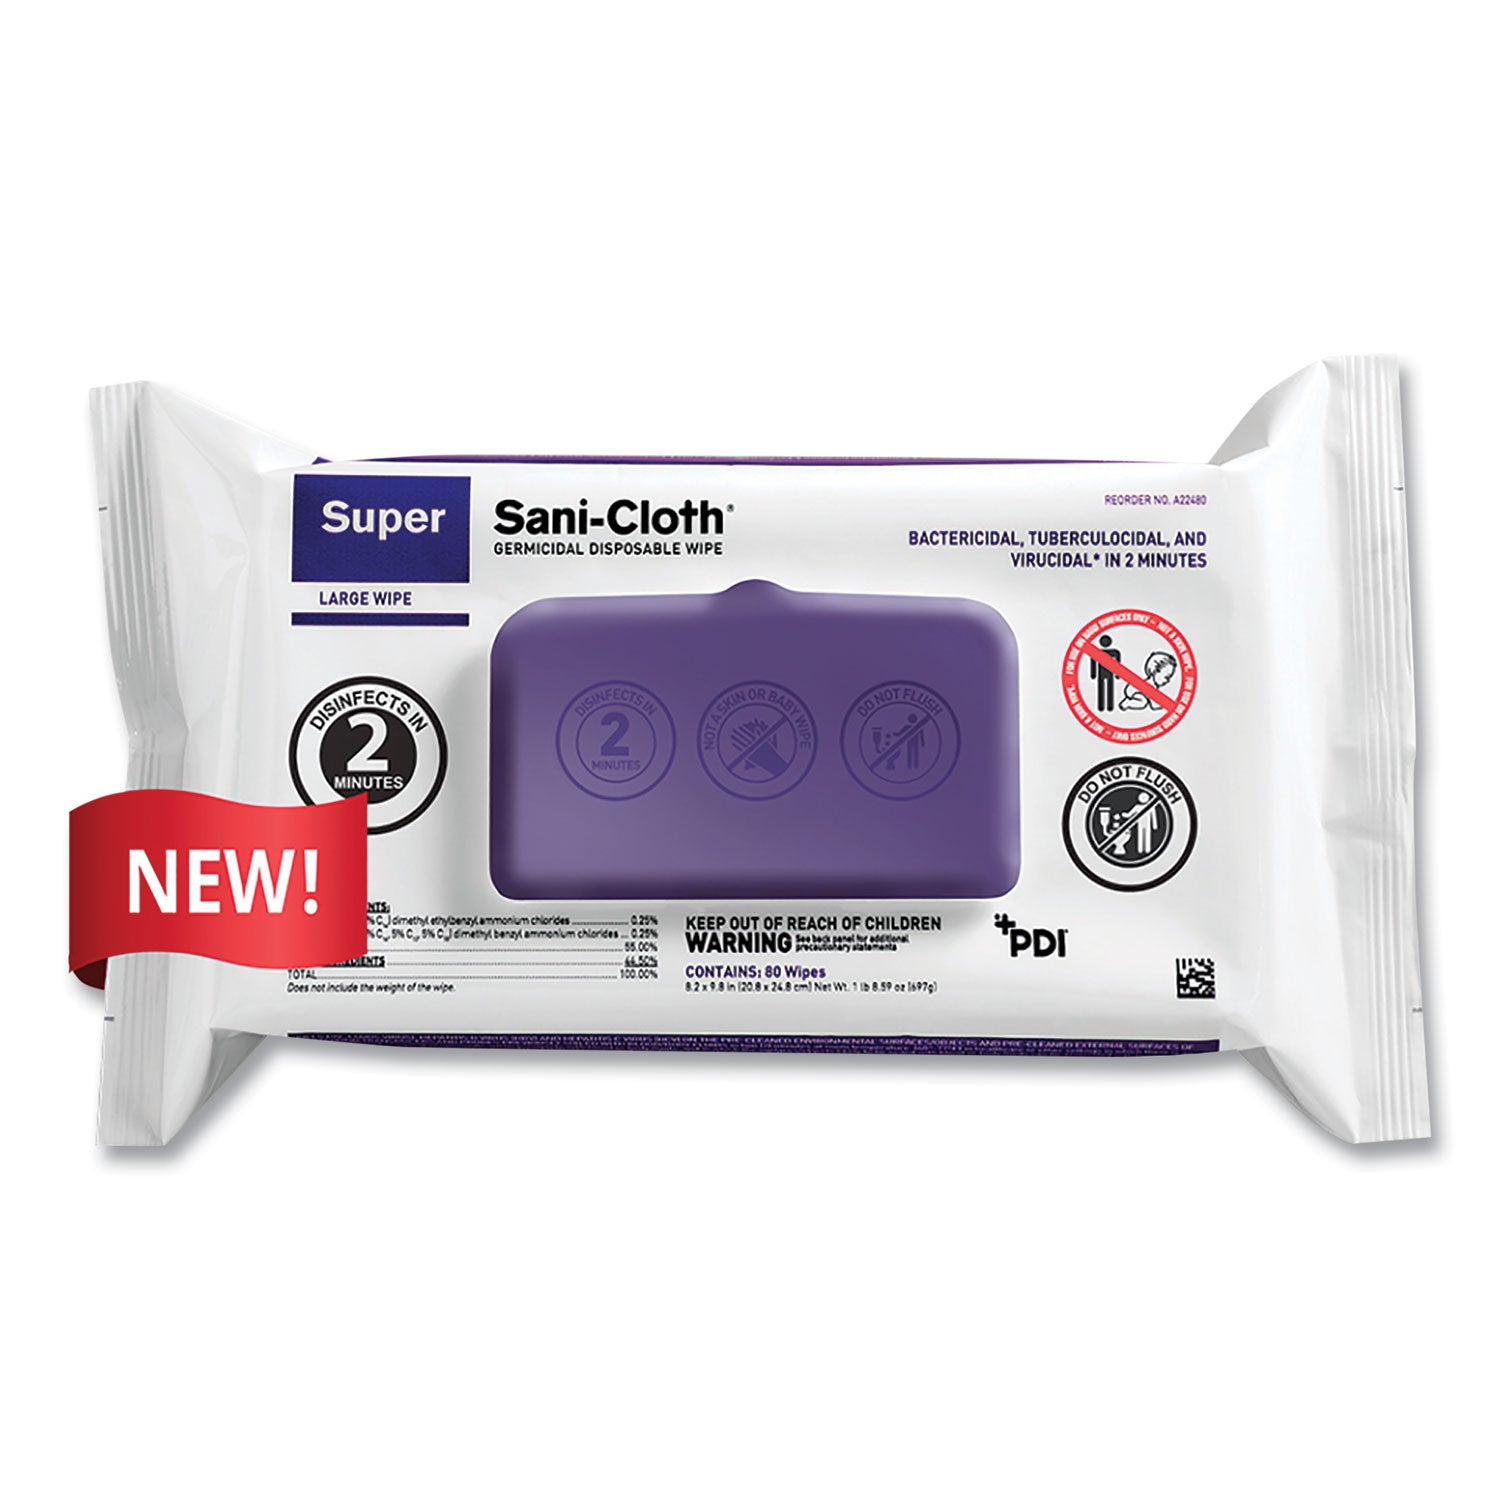 super-sani-cloth-germicidal-disposable-wipes-large-1-ply-82-x-98-unscented-white-80-pack_pdia22480 - 1